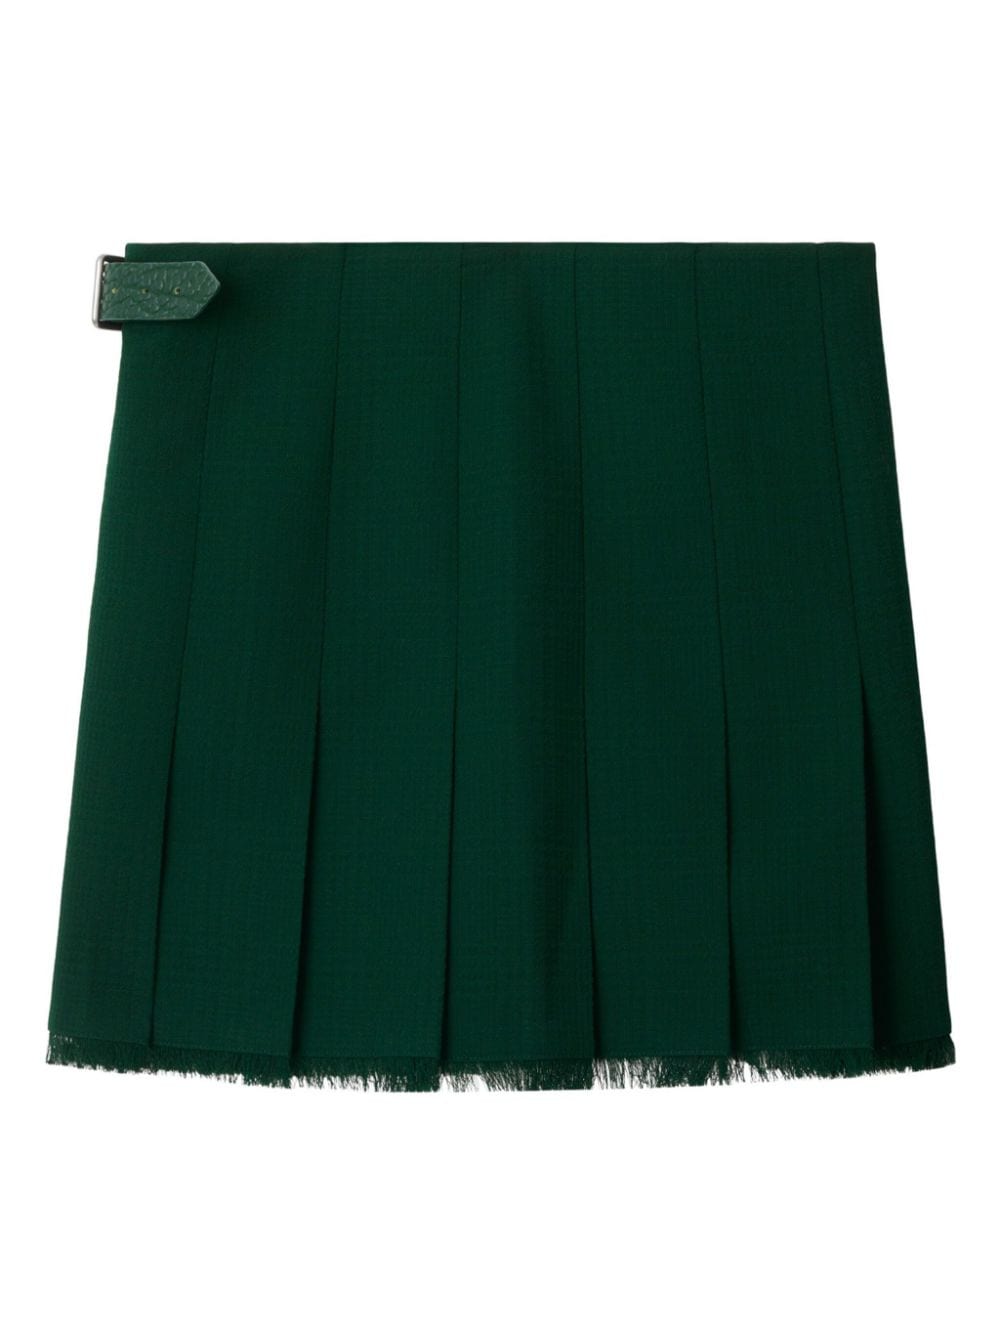 Frayed-edge wool pleated skirt<BR/><BR/><BR/>